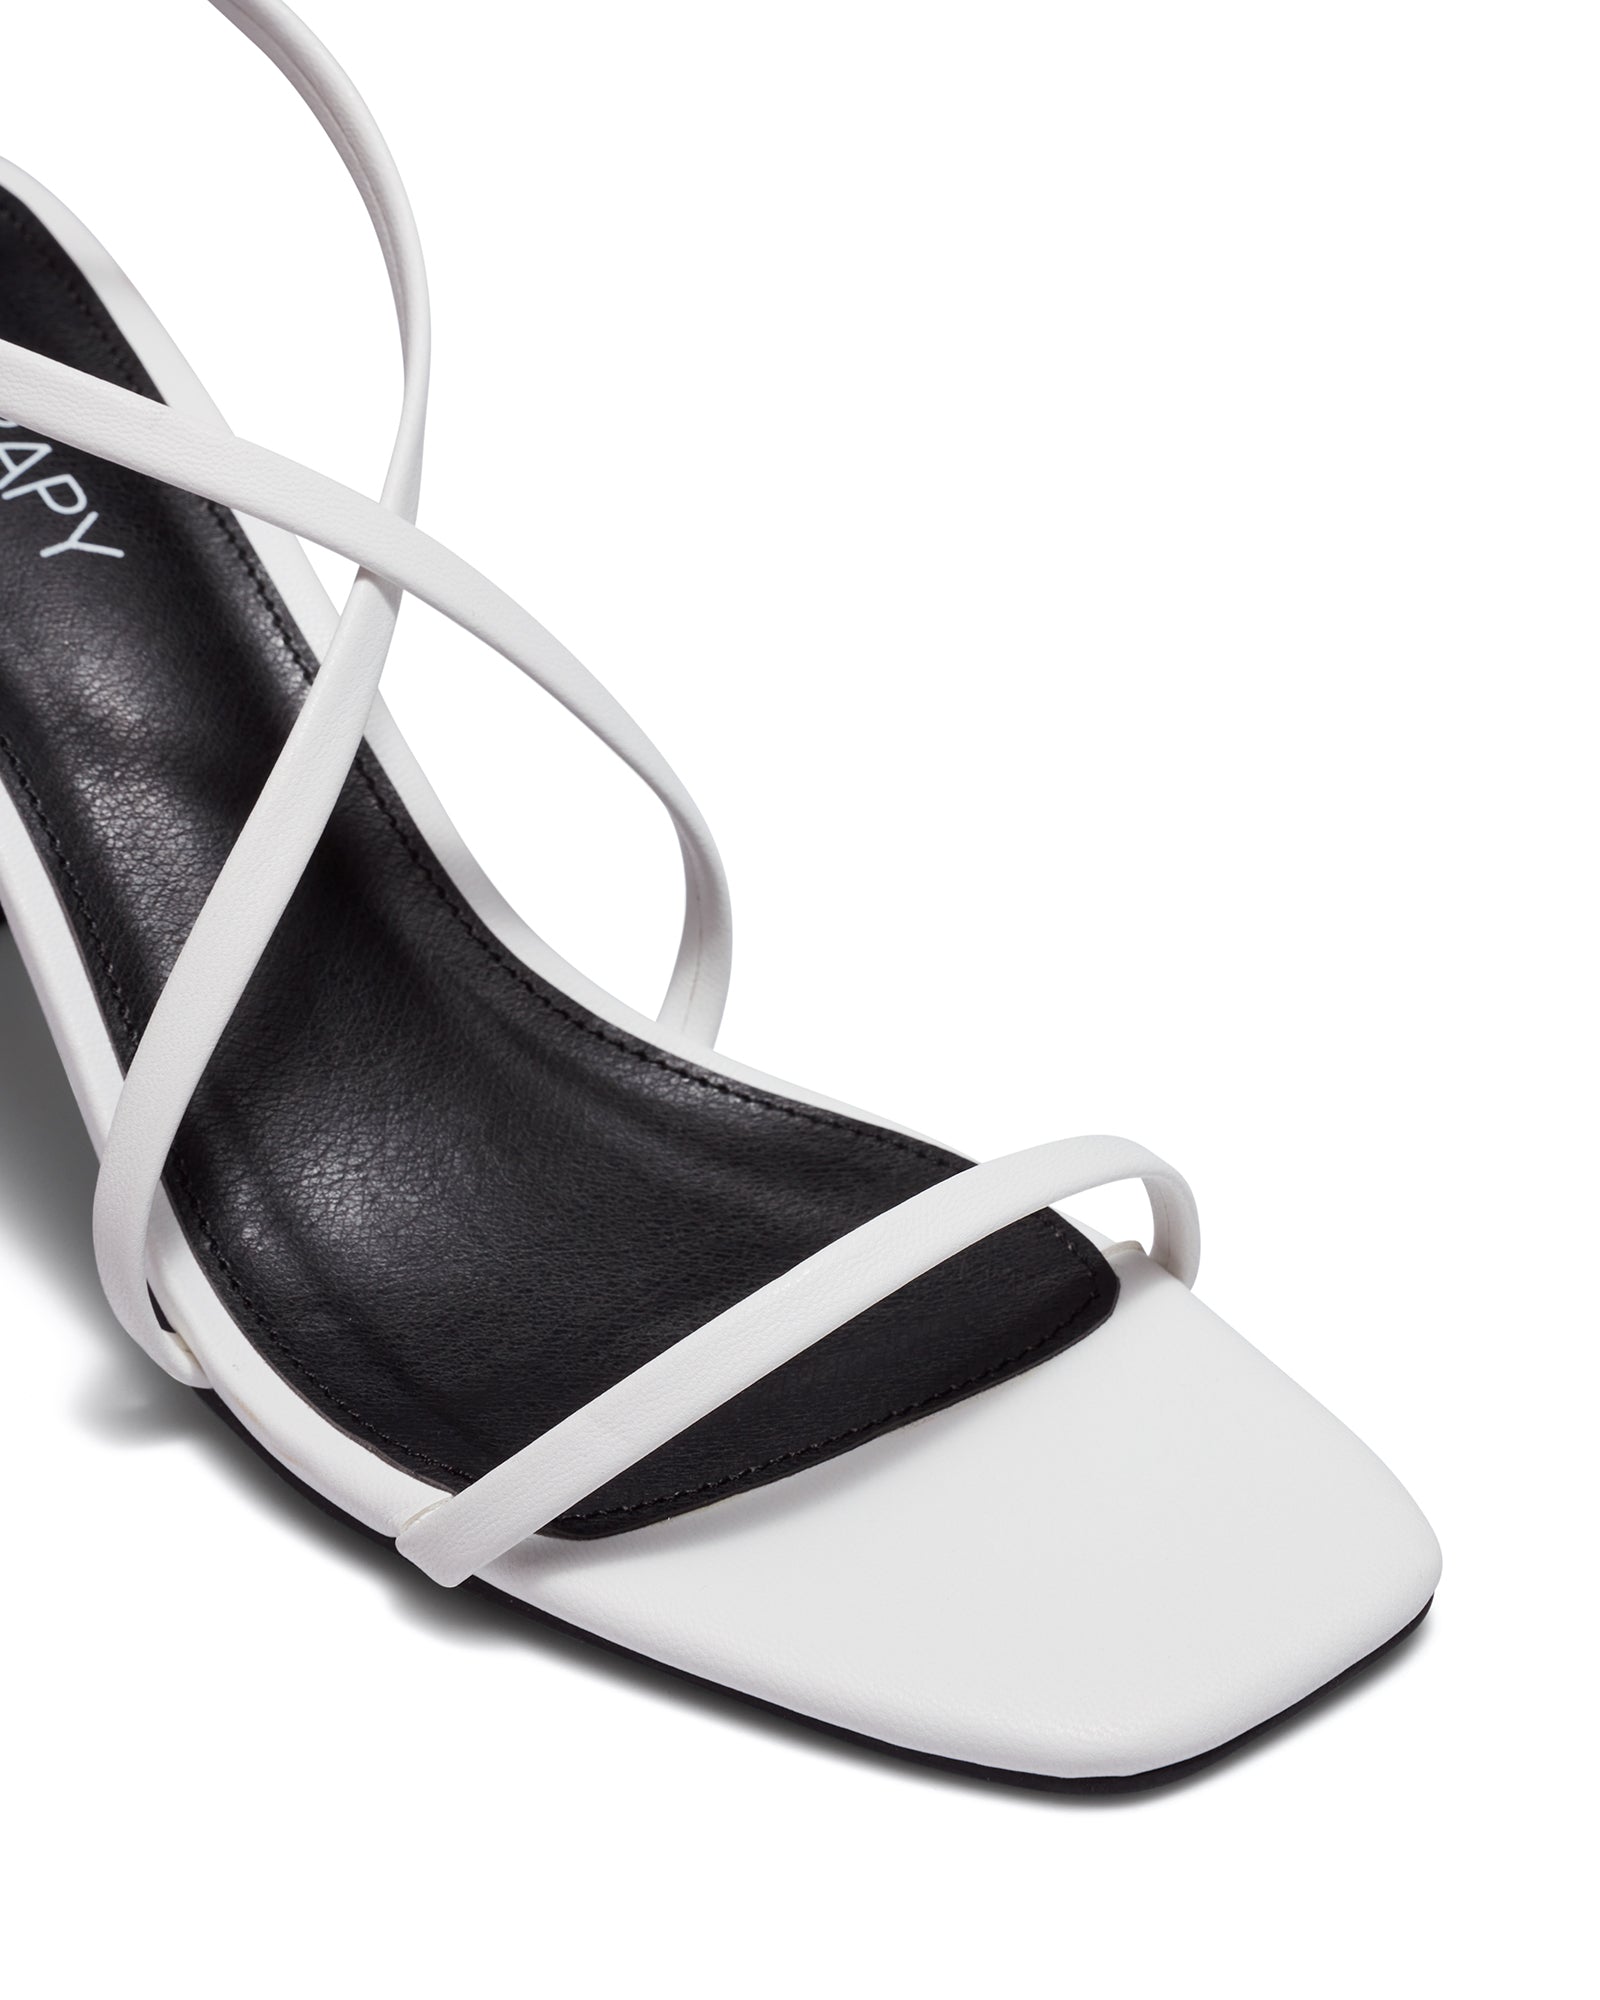 Therapy Shoes Kairo White | Women's Heels | Sandals | Strappy | Dress